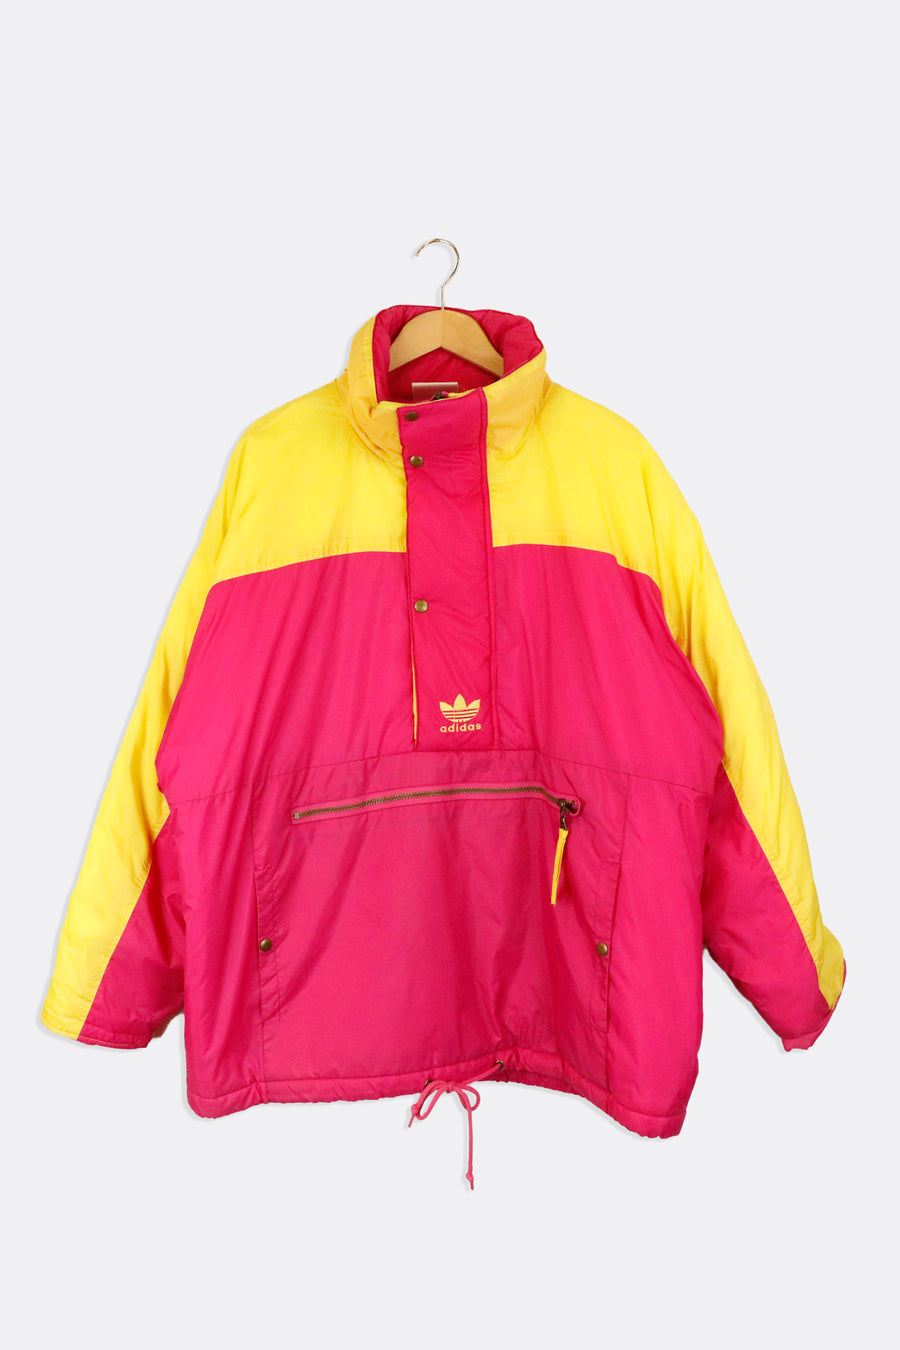 Vintage Adidas Quarter Zip Pink And Yellow Colour Block Puff Jacket